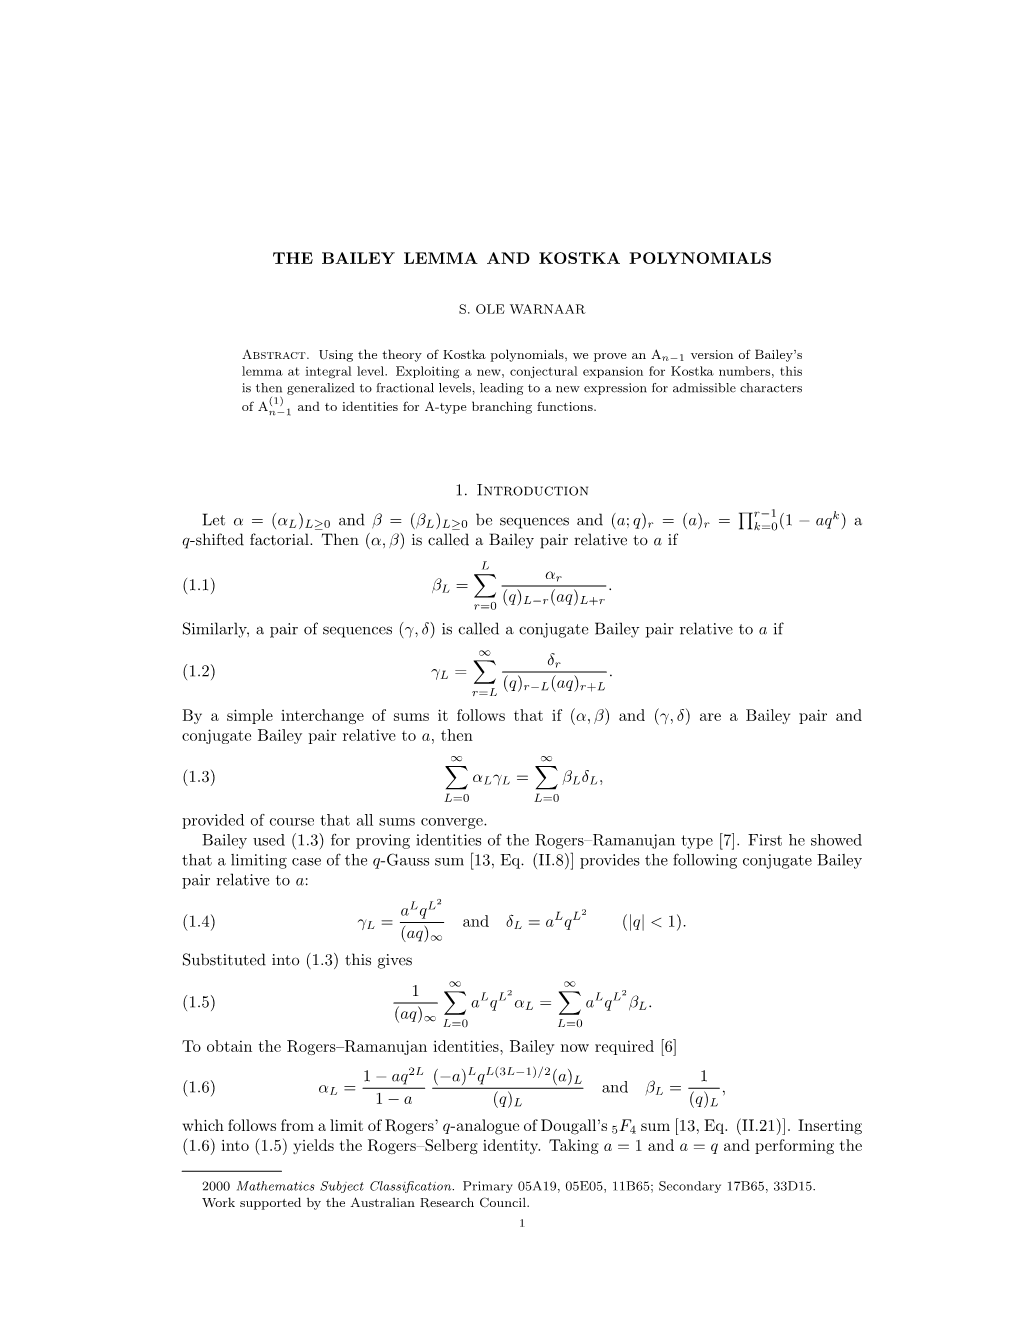 THE BAILEY LEMMA and KOSTKA POLYNOMIALS 1. Introduction Let